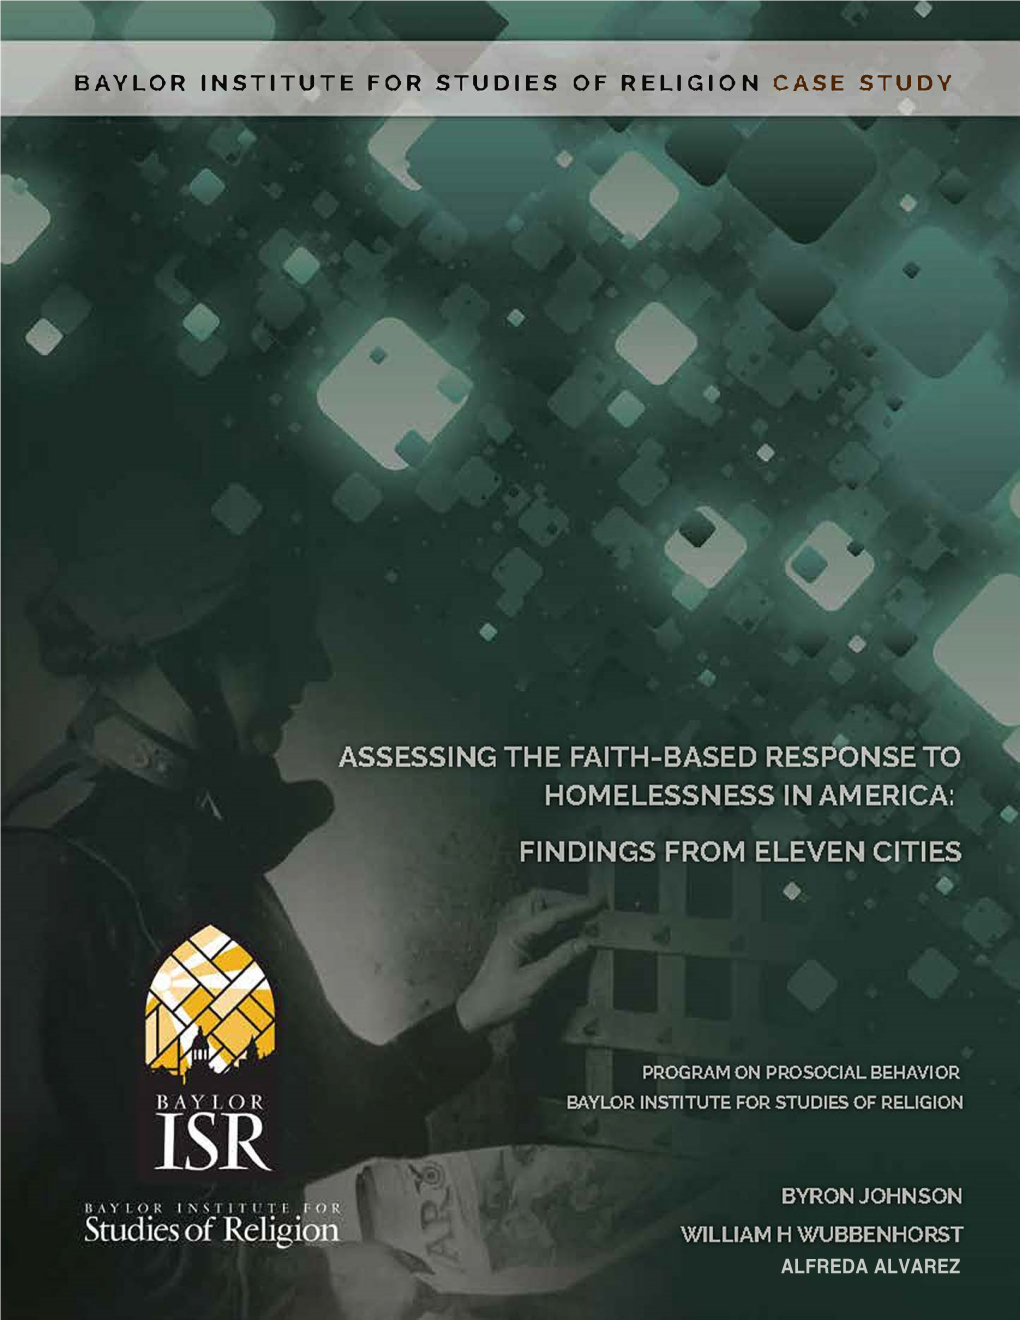 Assessing the Faith-Based Response to Homelessness in America: Findings from Eleven Cities